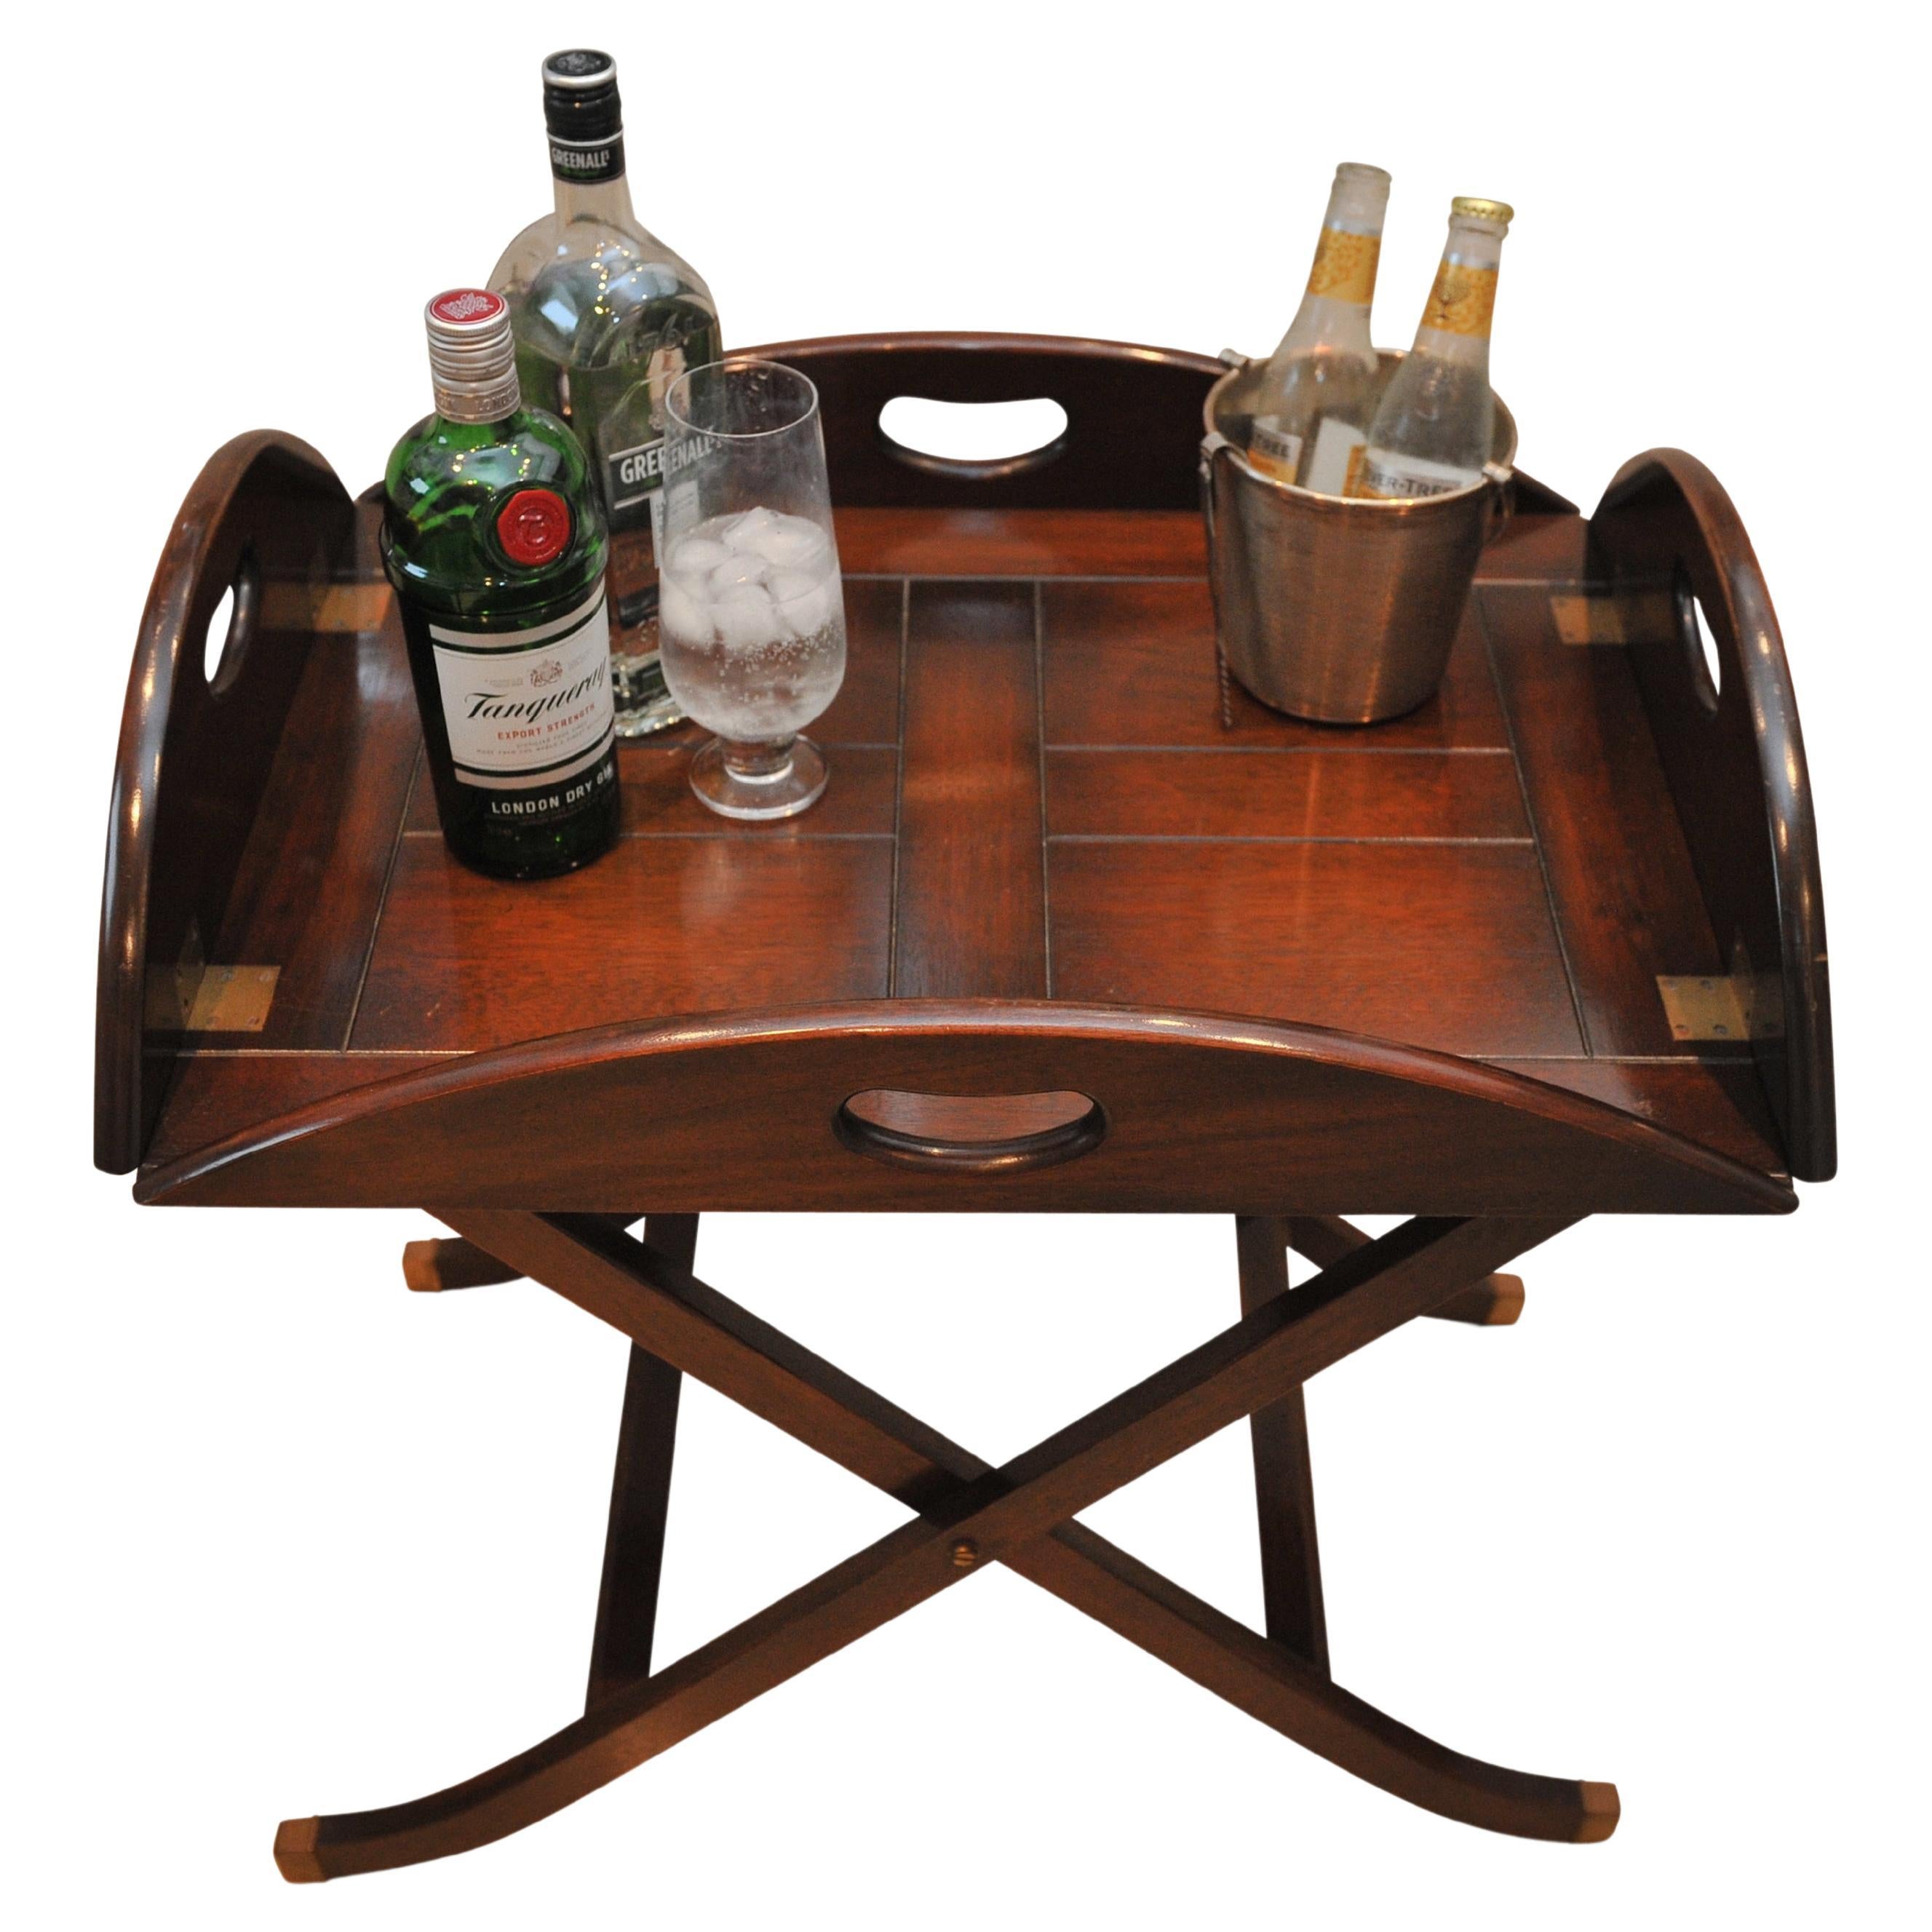 Bevan Funnell Military Campaign George III Butlers tray with folding Stand having foldable galleried handles & brass idents and feet

- Wonderful tray for drinks or collectibles in any modern or travel inspired setting
- handmade dovetail corner